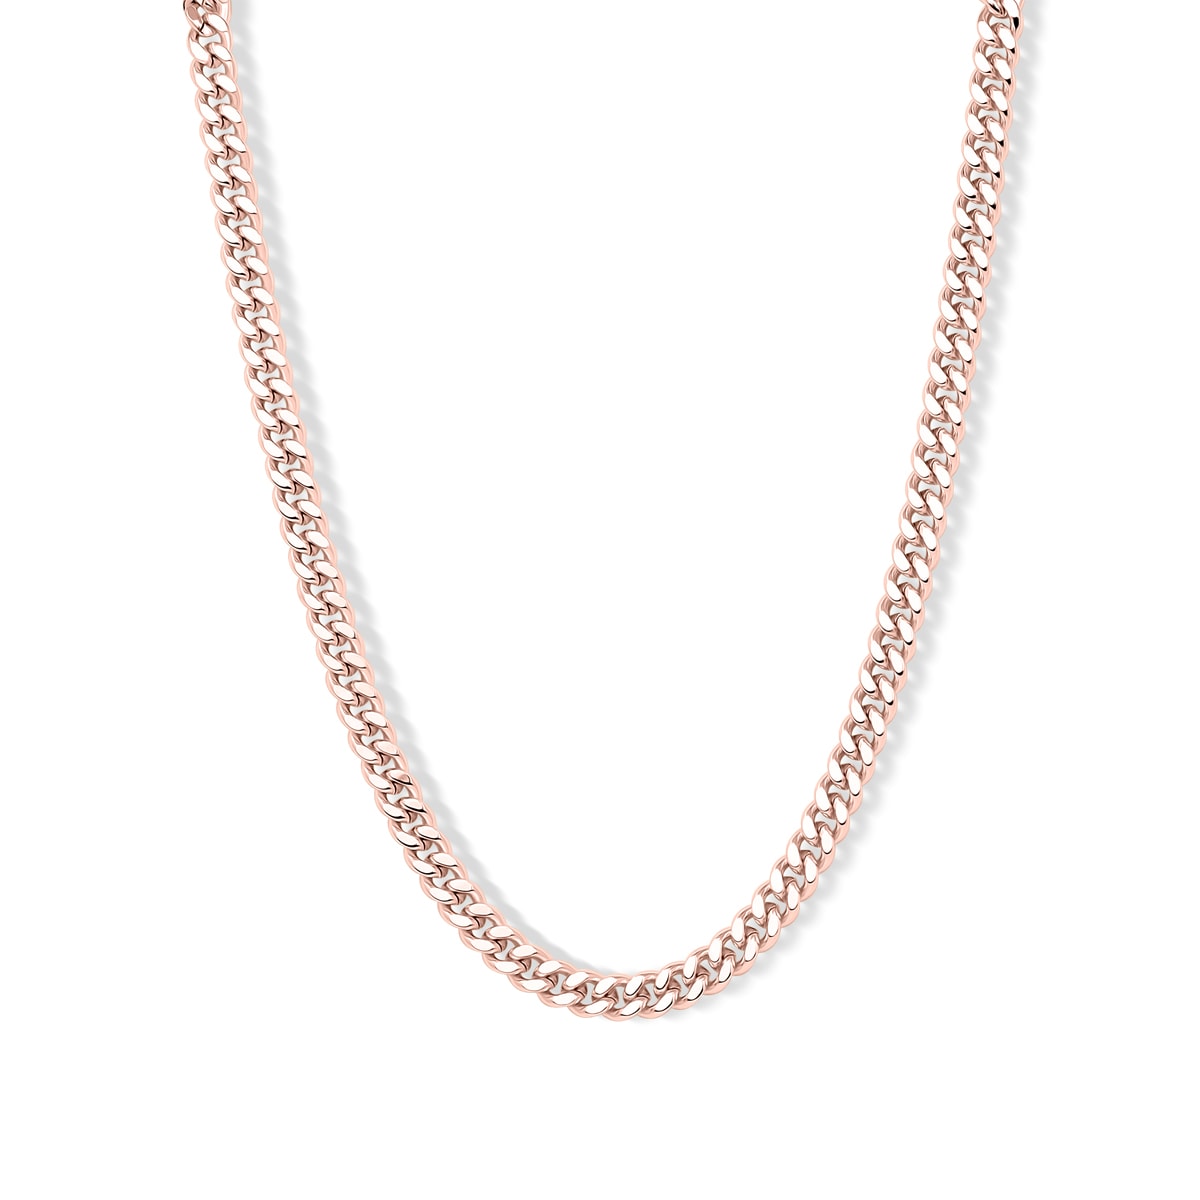 Bold rose gold chain necklace